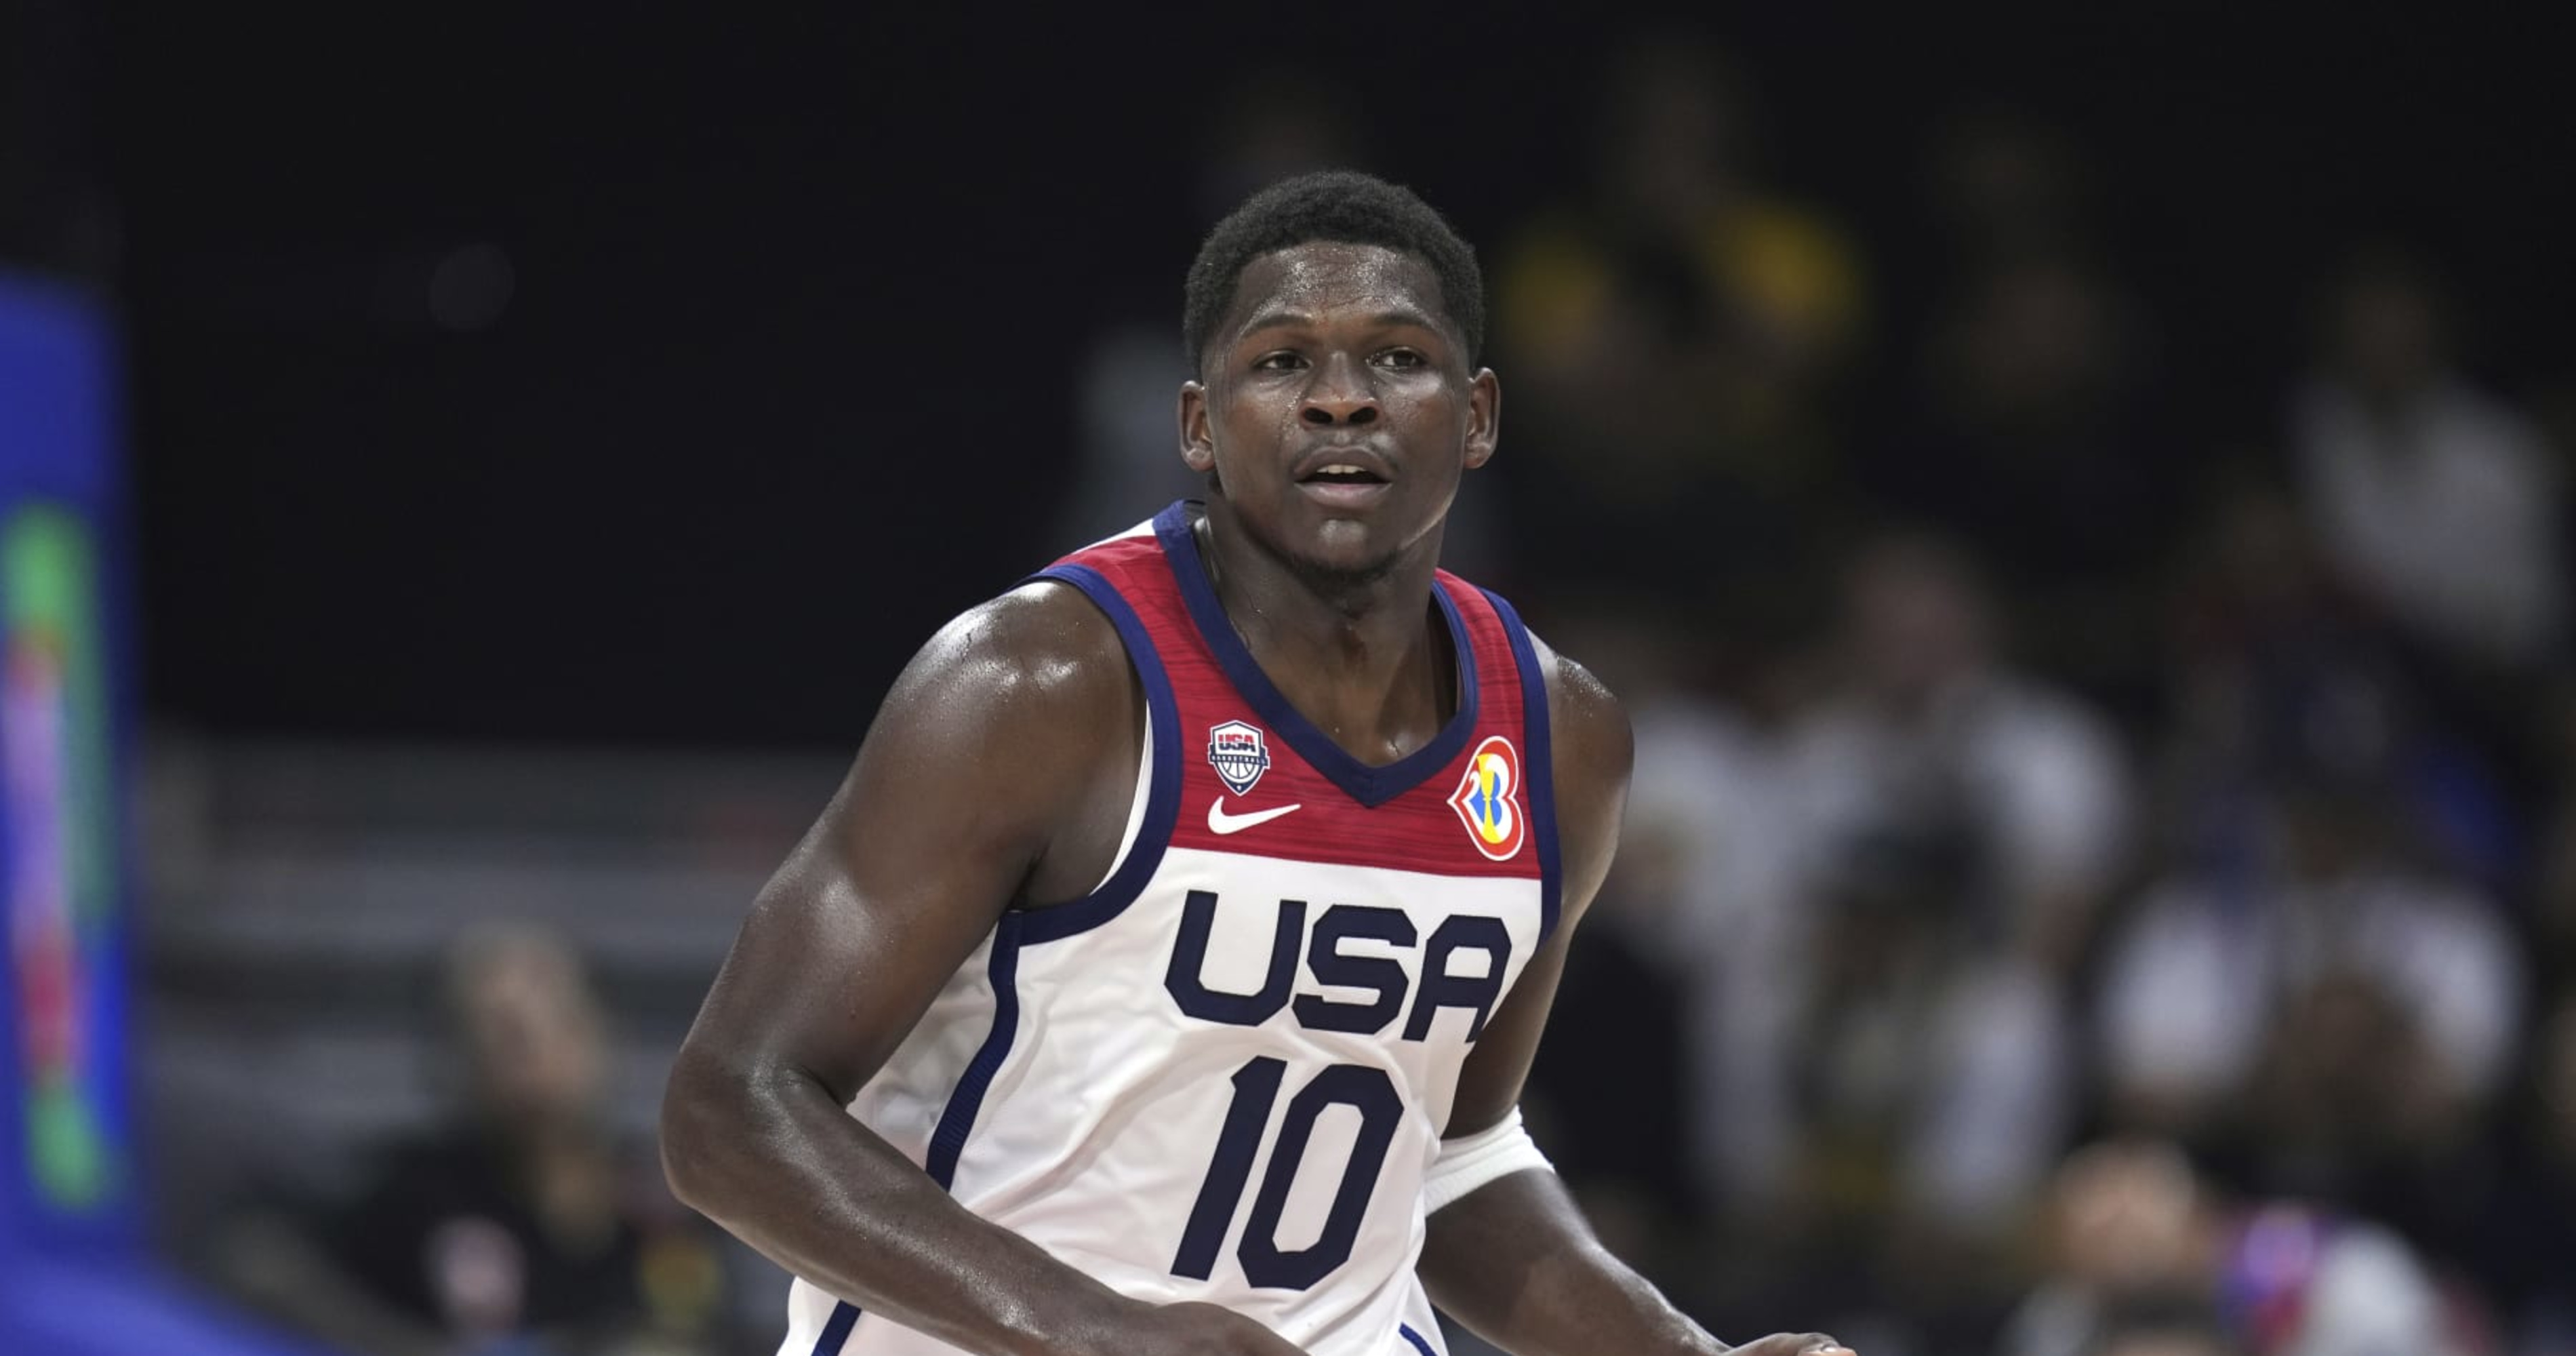 Team USA will take Anthony Edwards to the next level